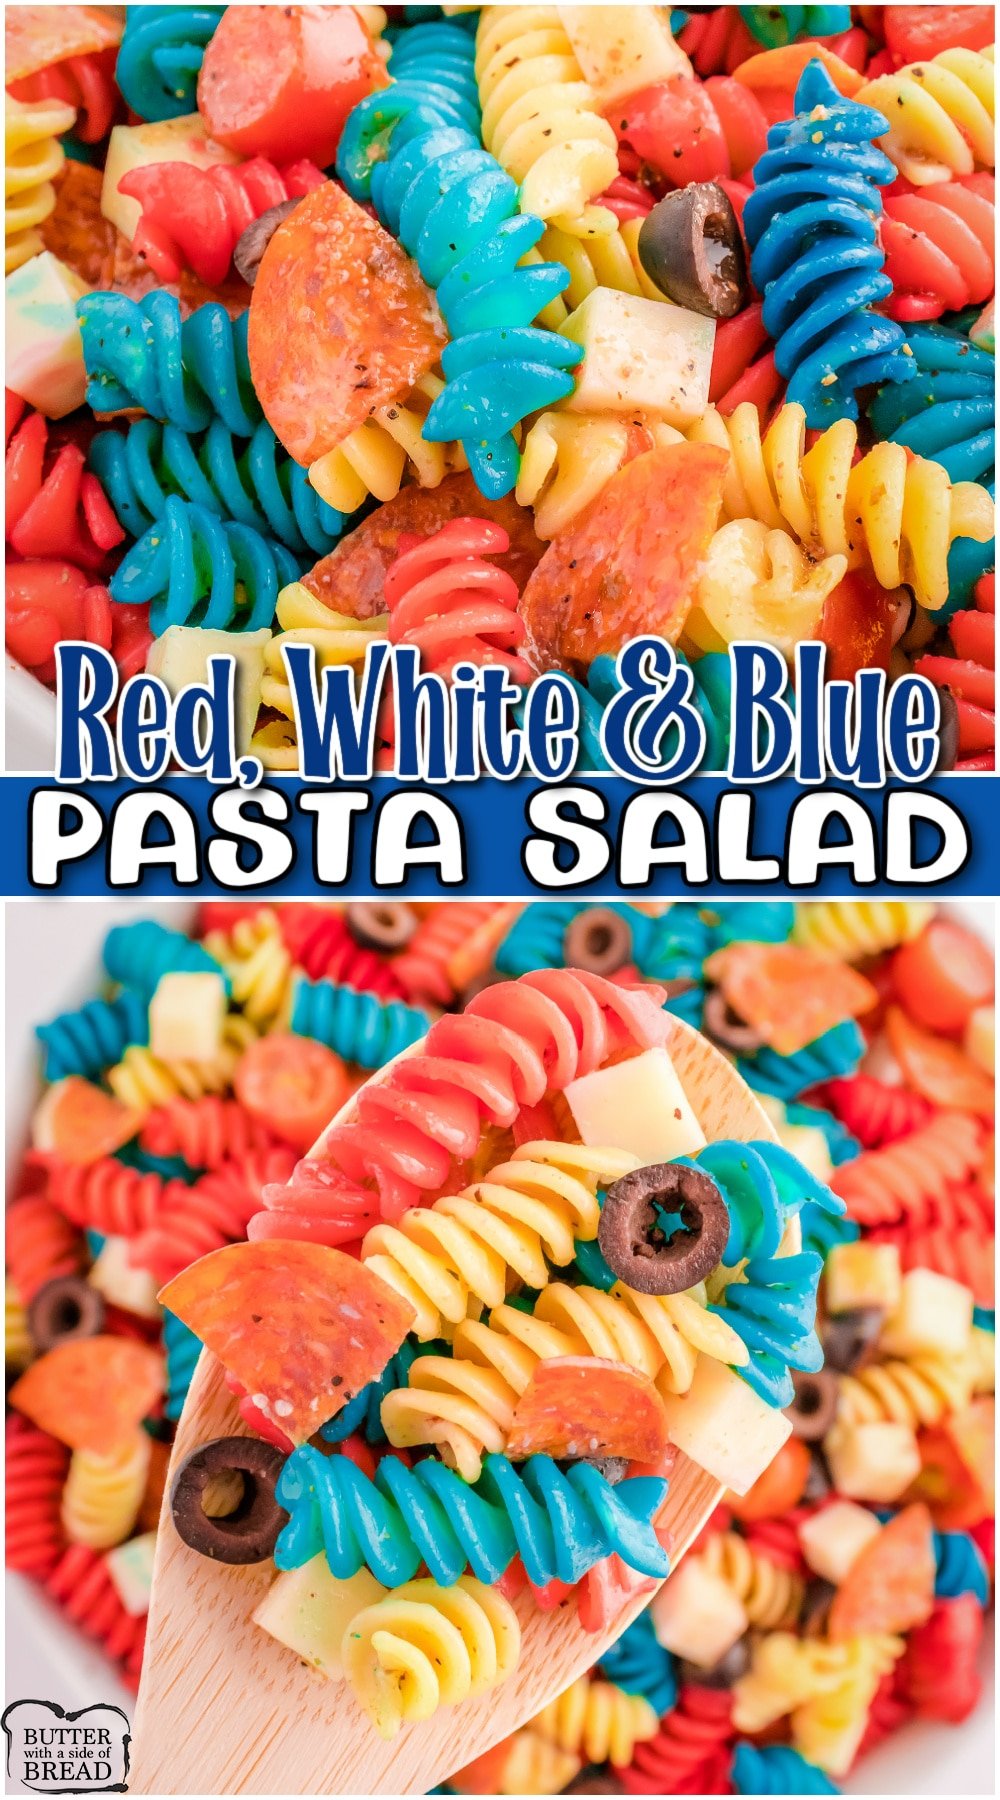 Red, White and Blue Pasta Salad made with pasta, mozzarella cheese, pepperoni, tomatoes & your favorite Italian dressing! Fun & festive patriotic salad perfect for 4th of July! 